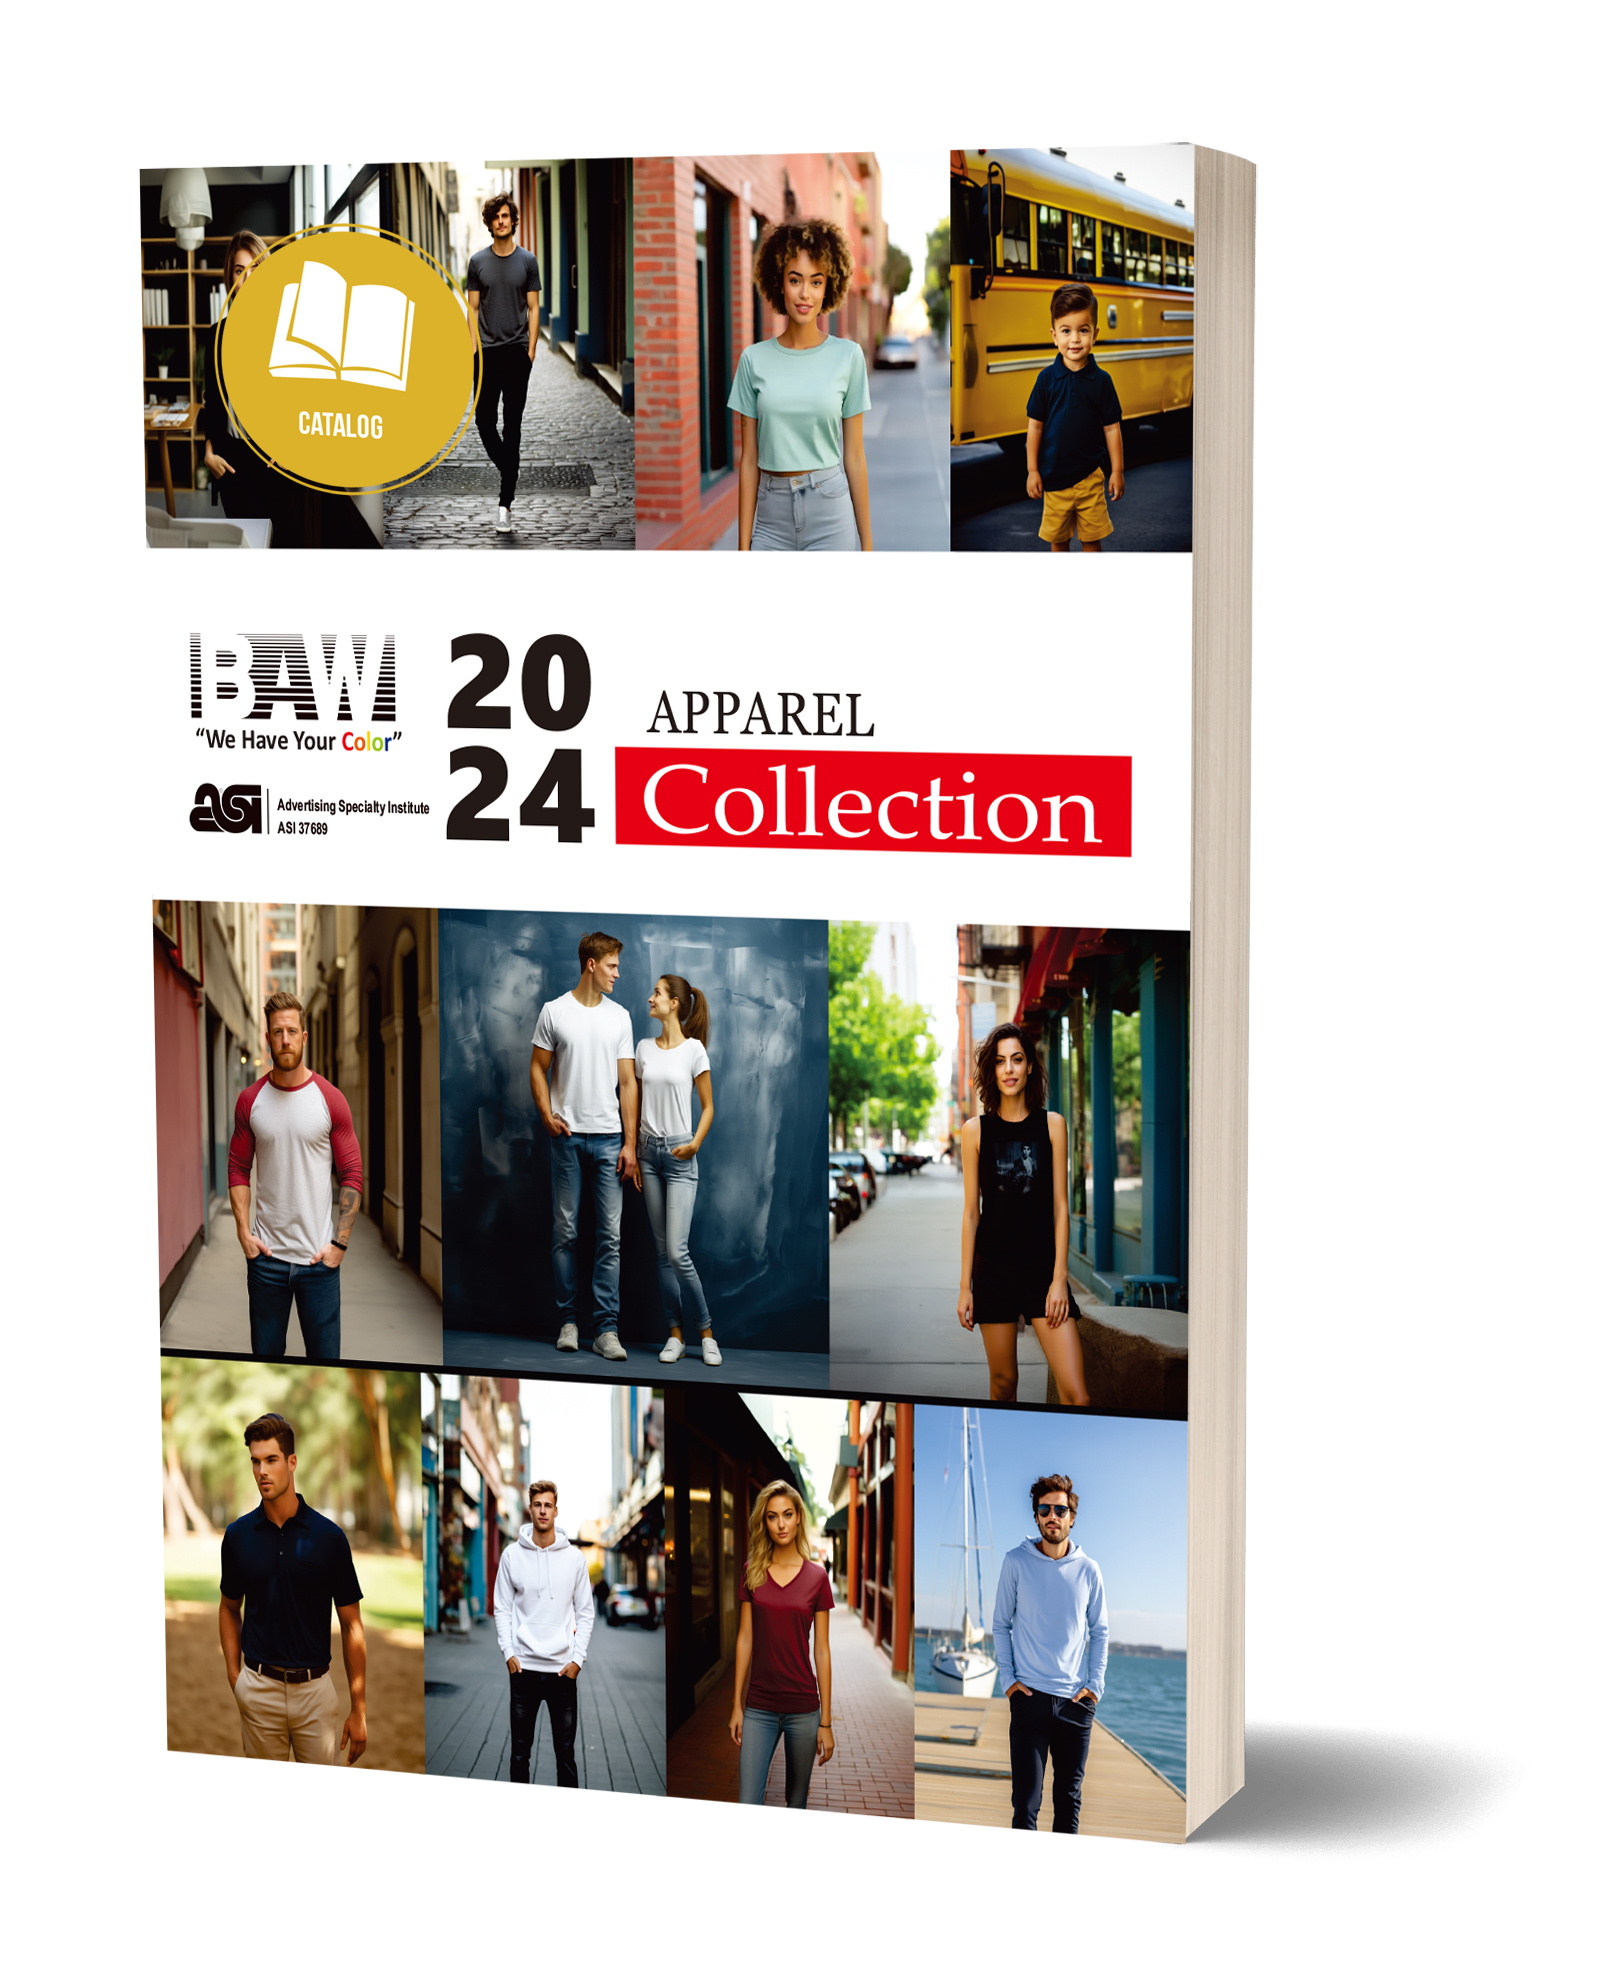 Click here to view 2023 BAW e-CATALOG